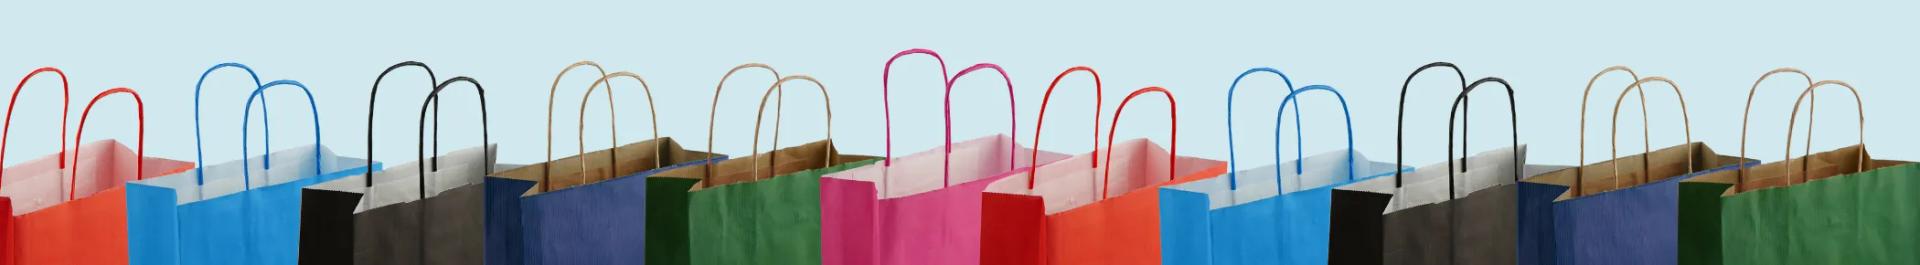 Colour Twisted Paper Carrier Bags